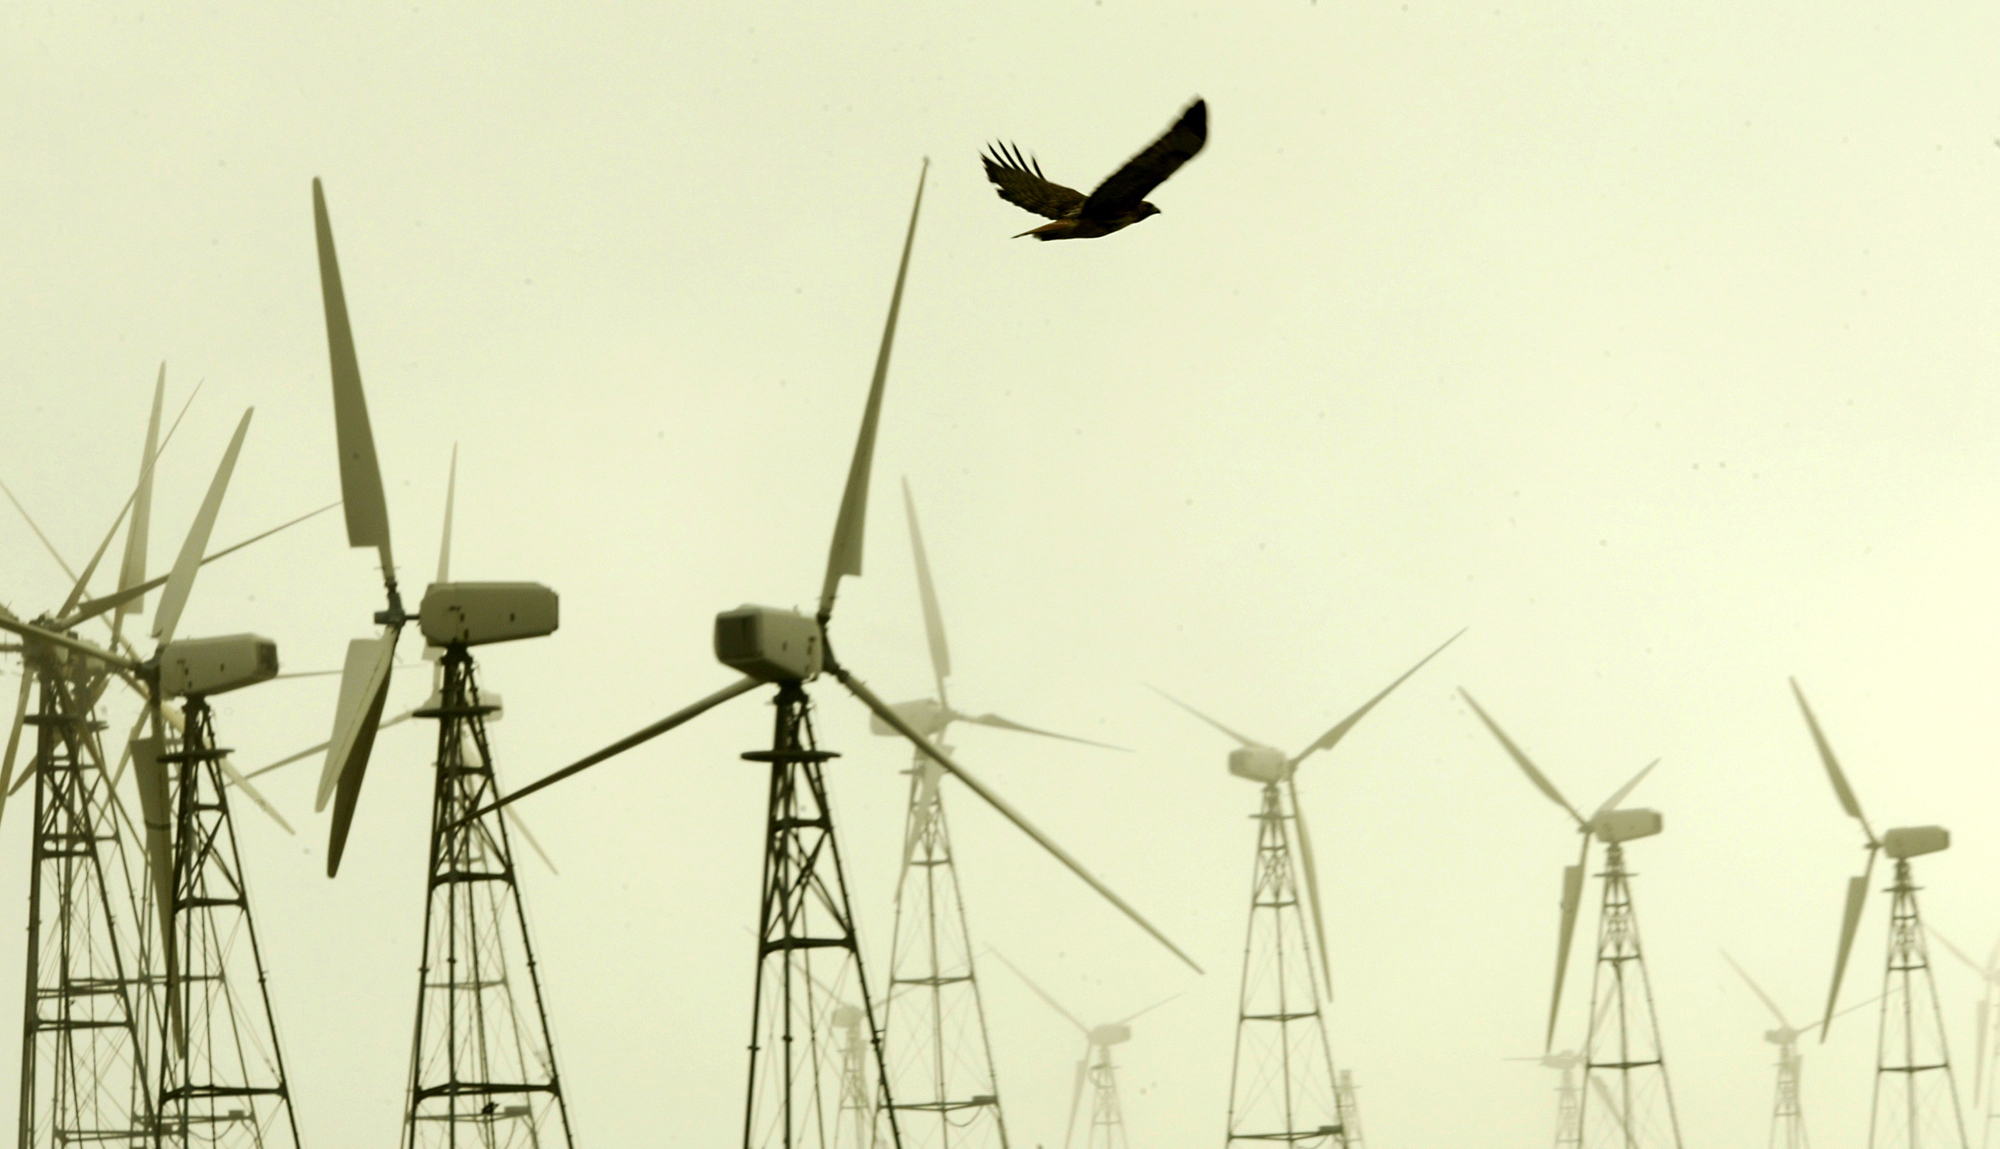 Meet the rogue birding group blocking wind energy at every turn